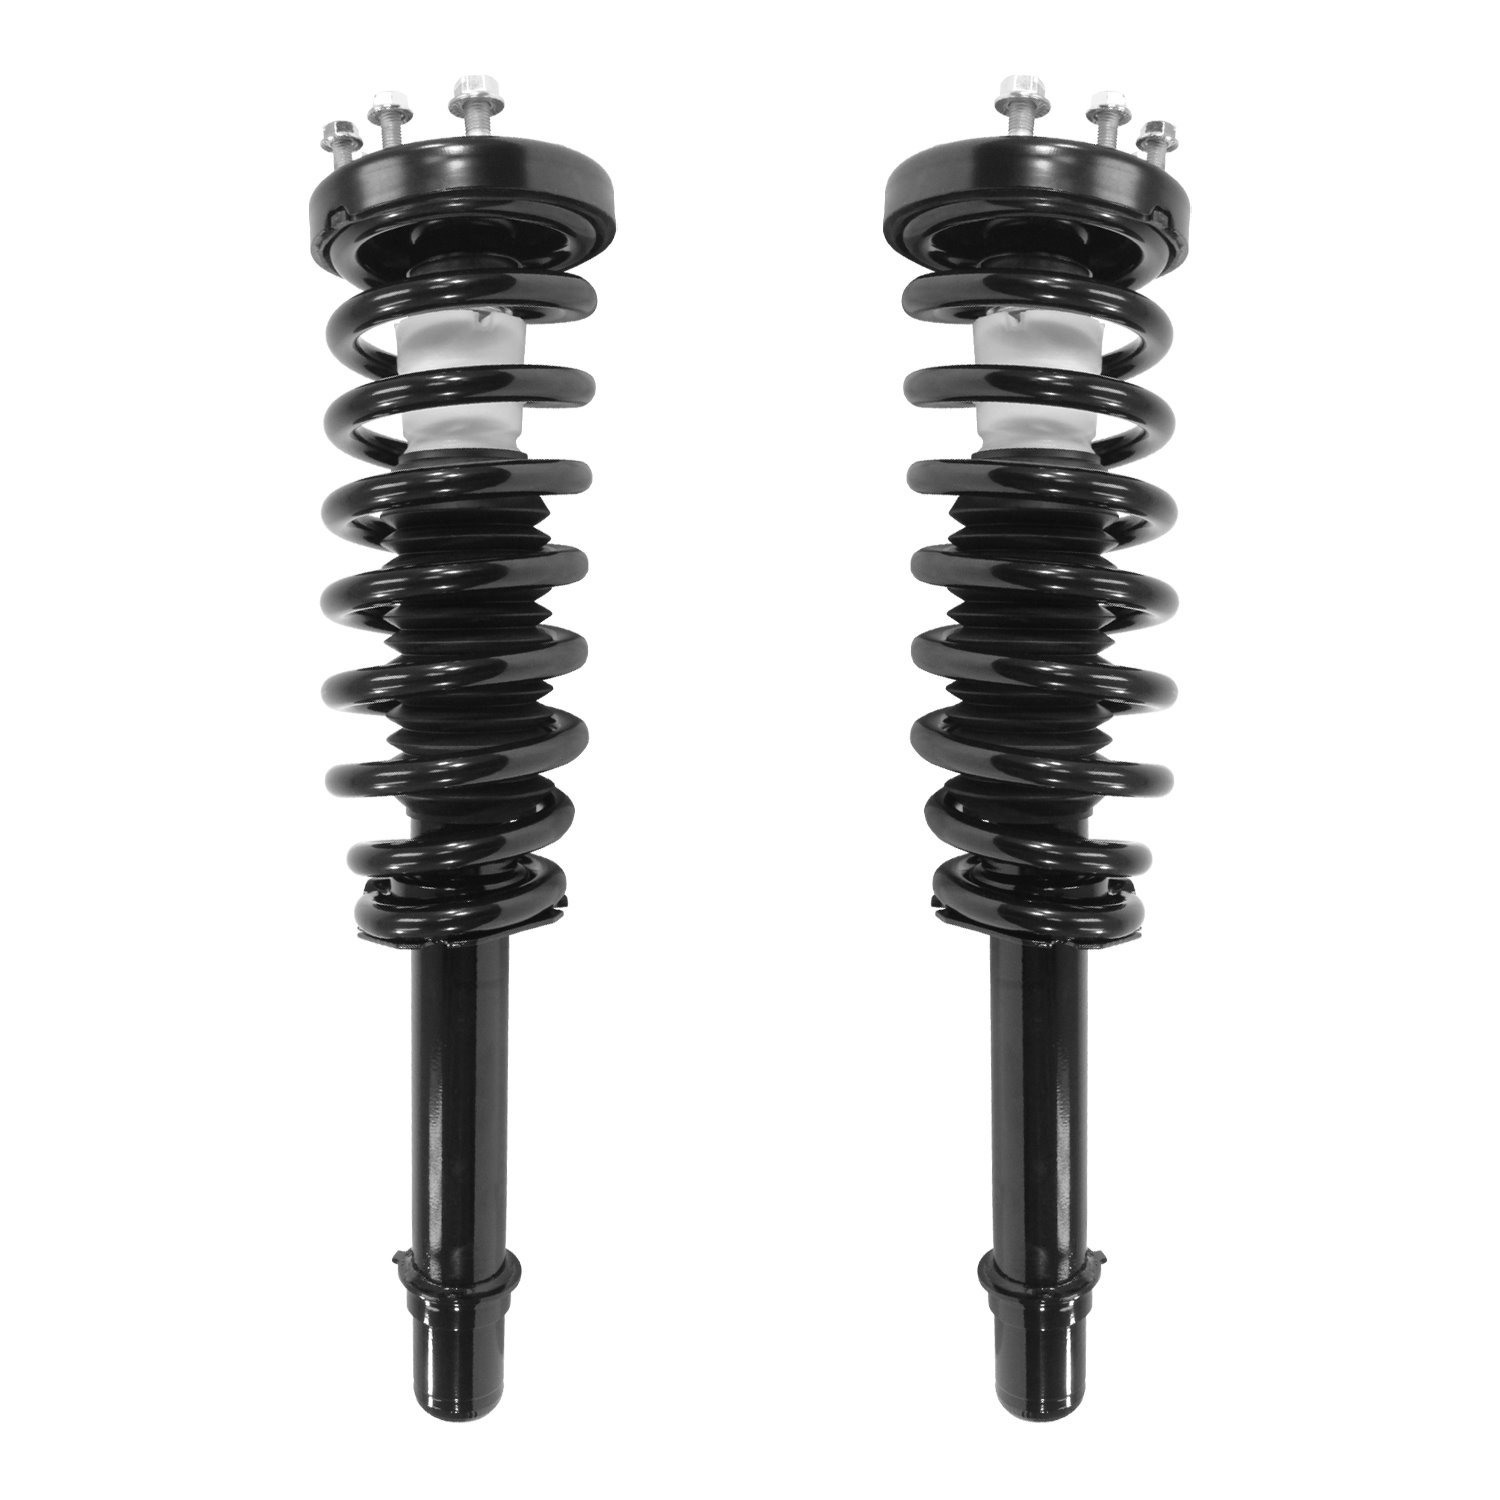 2-13103-13104-001 Suspension Strut & Coil Spring Assembly Set Fits Select Acura TSX